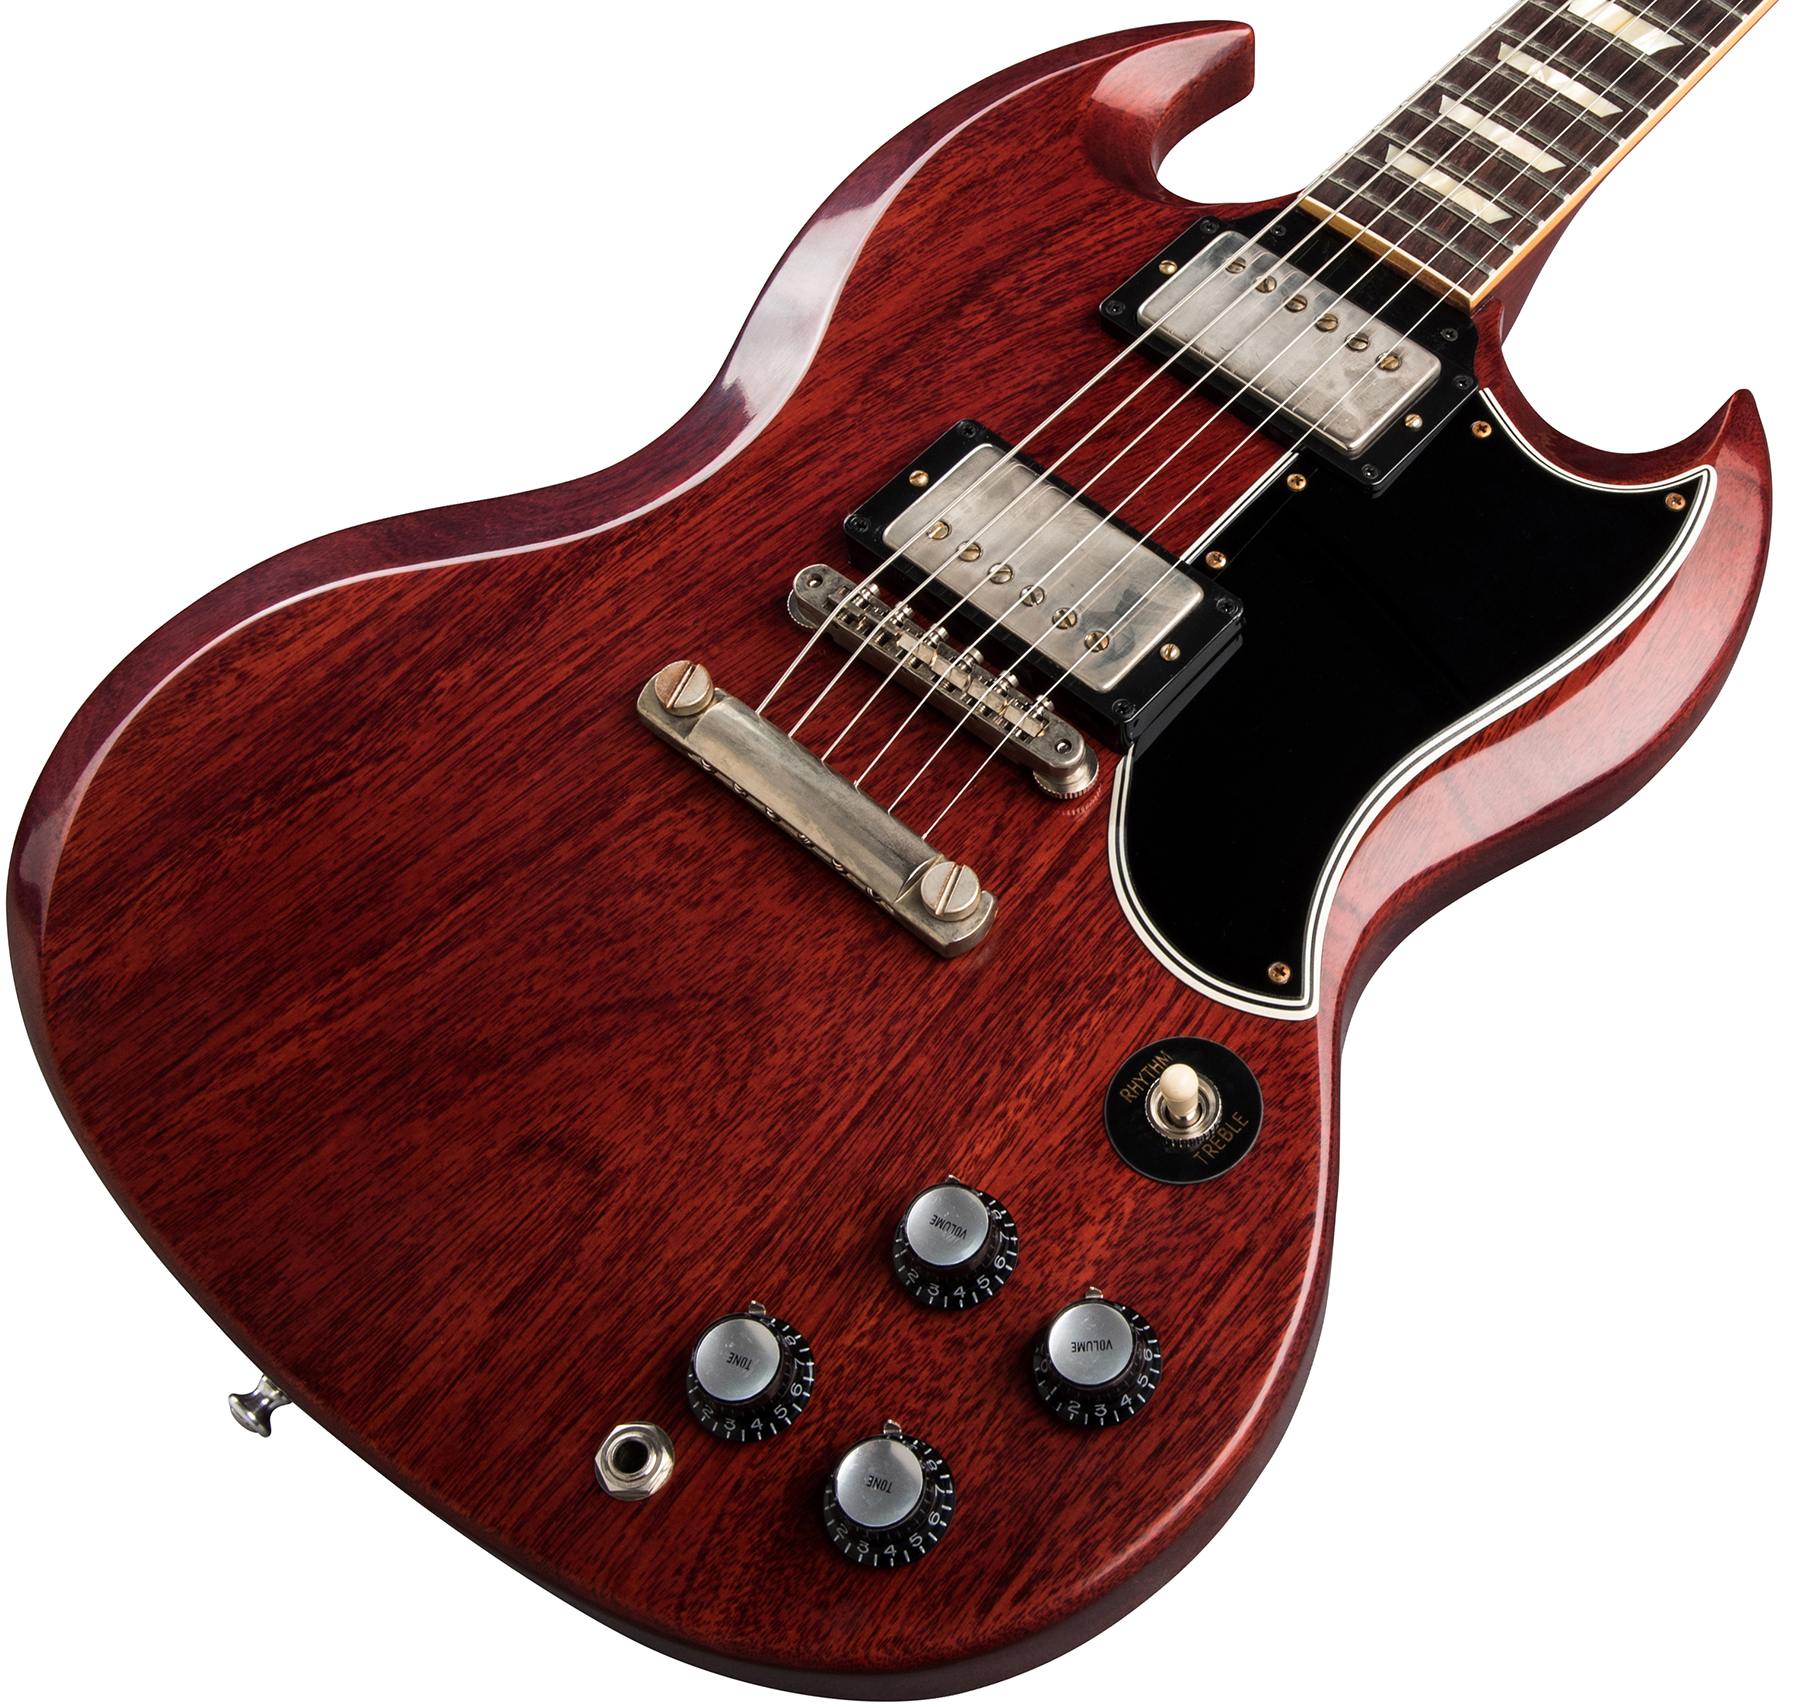 Gibson Custom Shop Sg Standard 1961 Reissue Stop Bar 2019 2h Ht Rw Rw - Vos Cherry Red - Double cut electric guitar - Variation 3